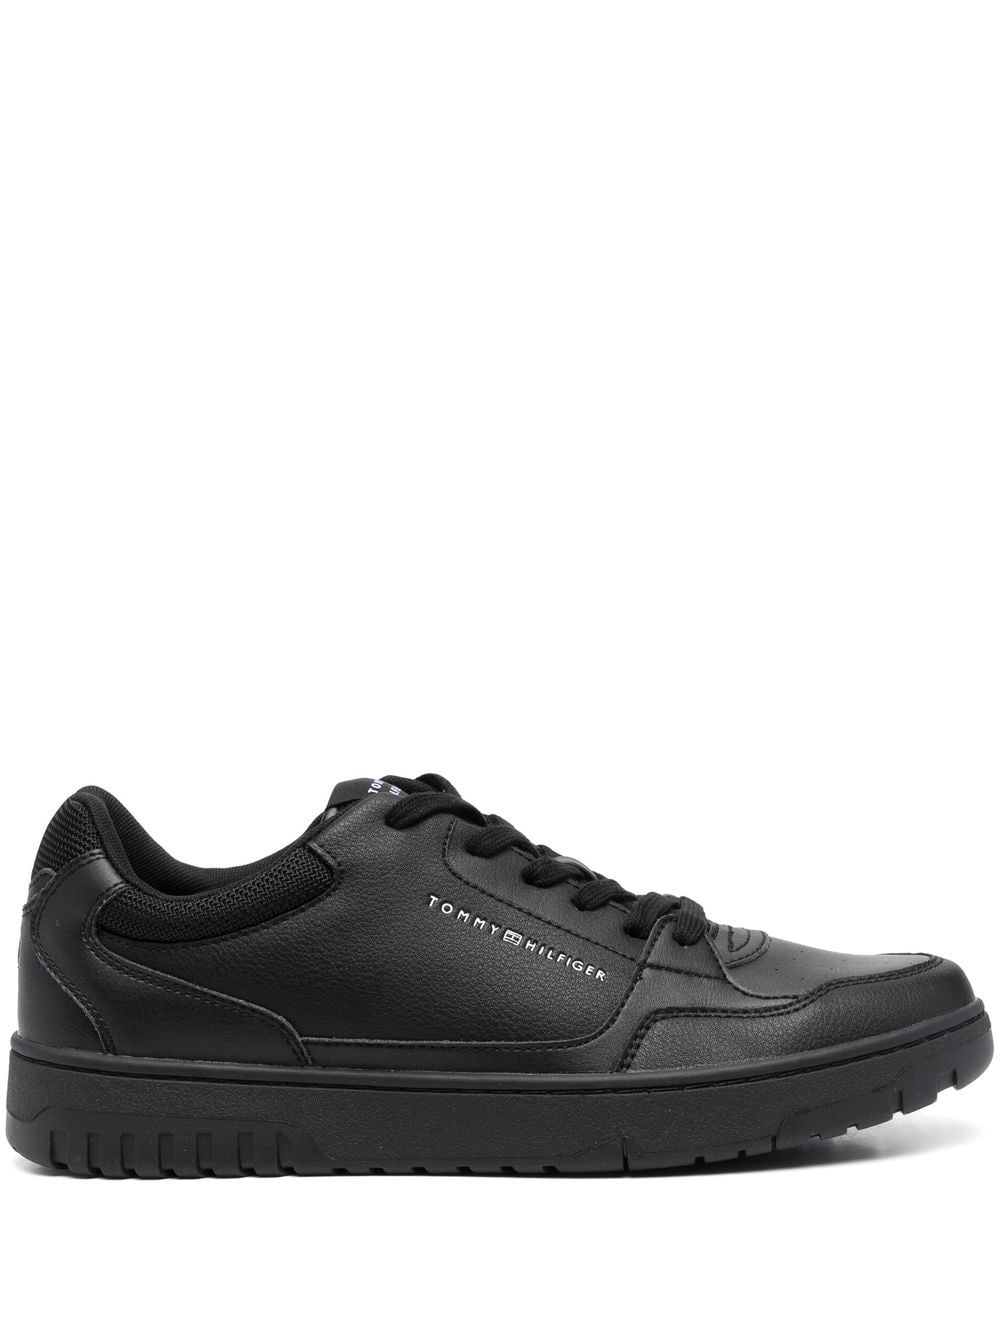 Tommy Hilfiger lace-up low top sneakers - Black von Tommy Hilfiger